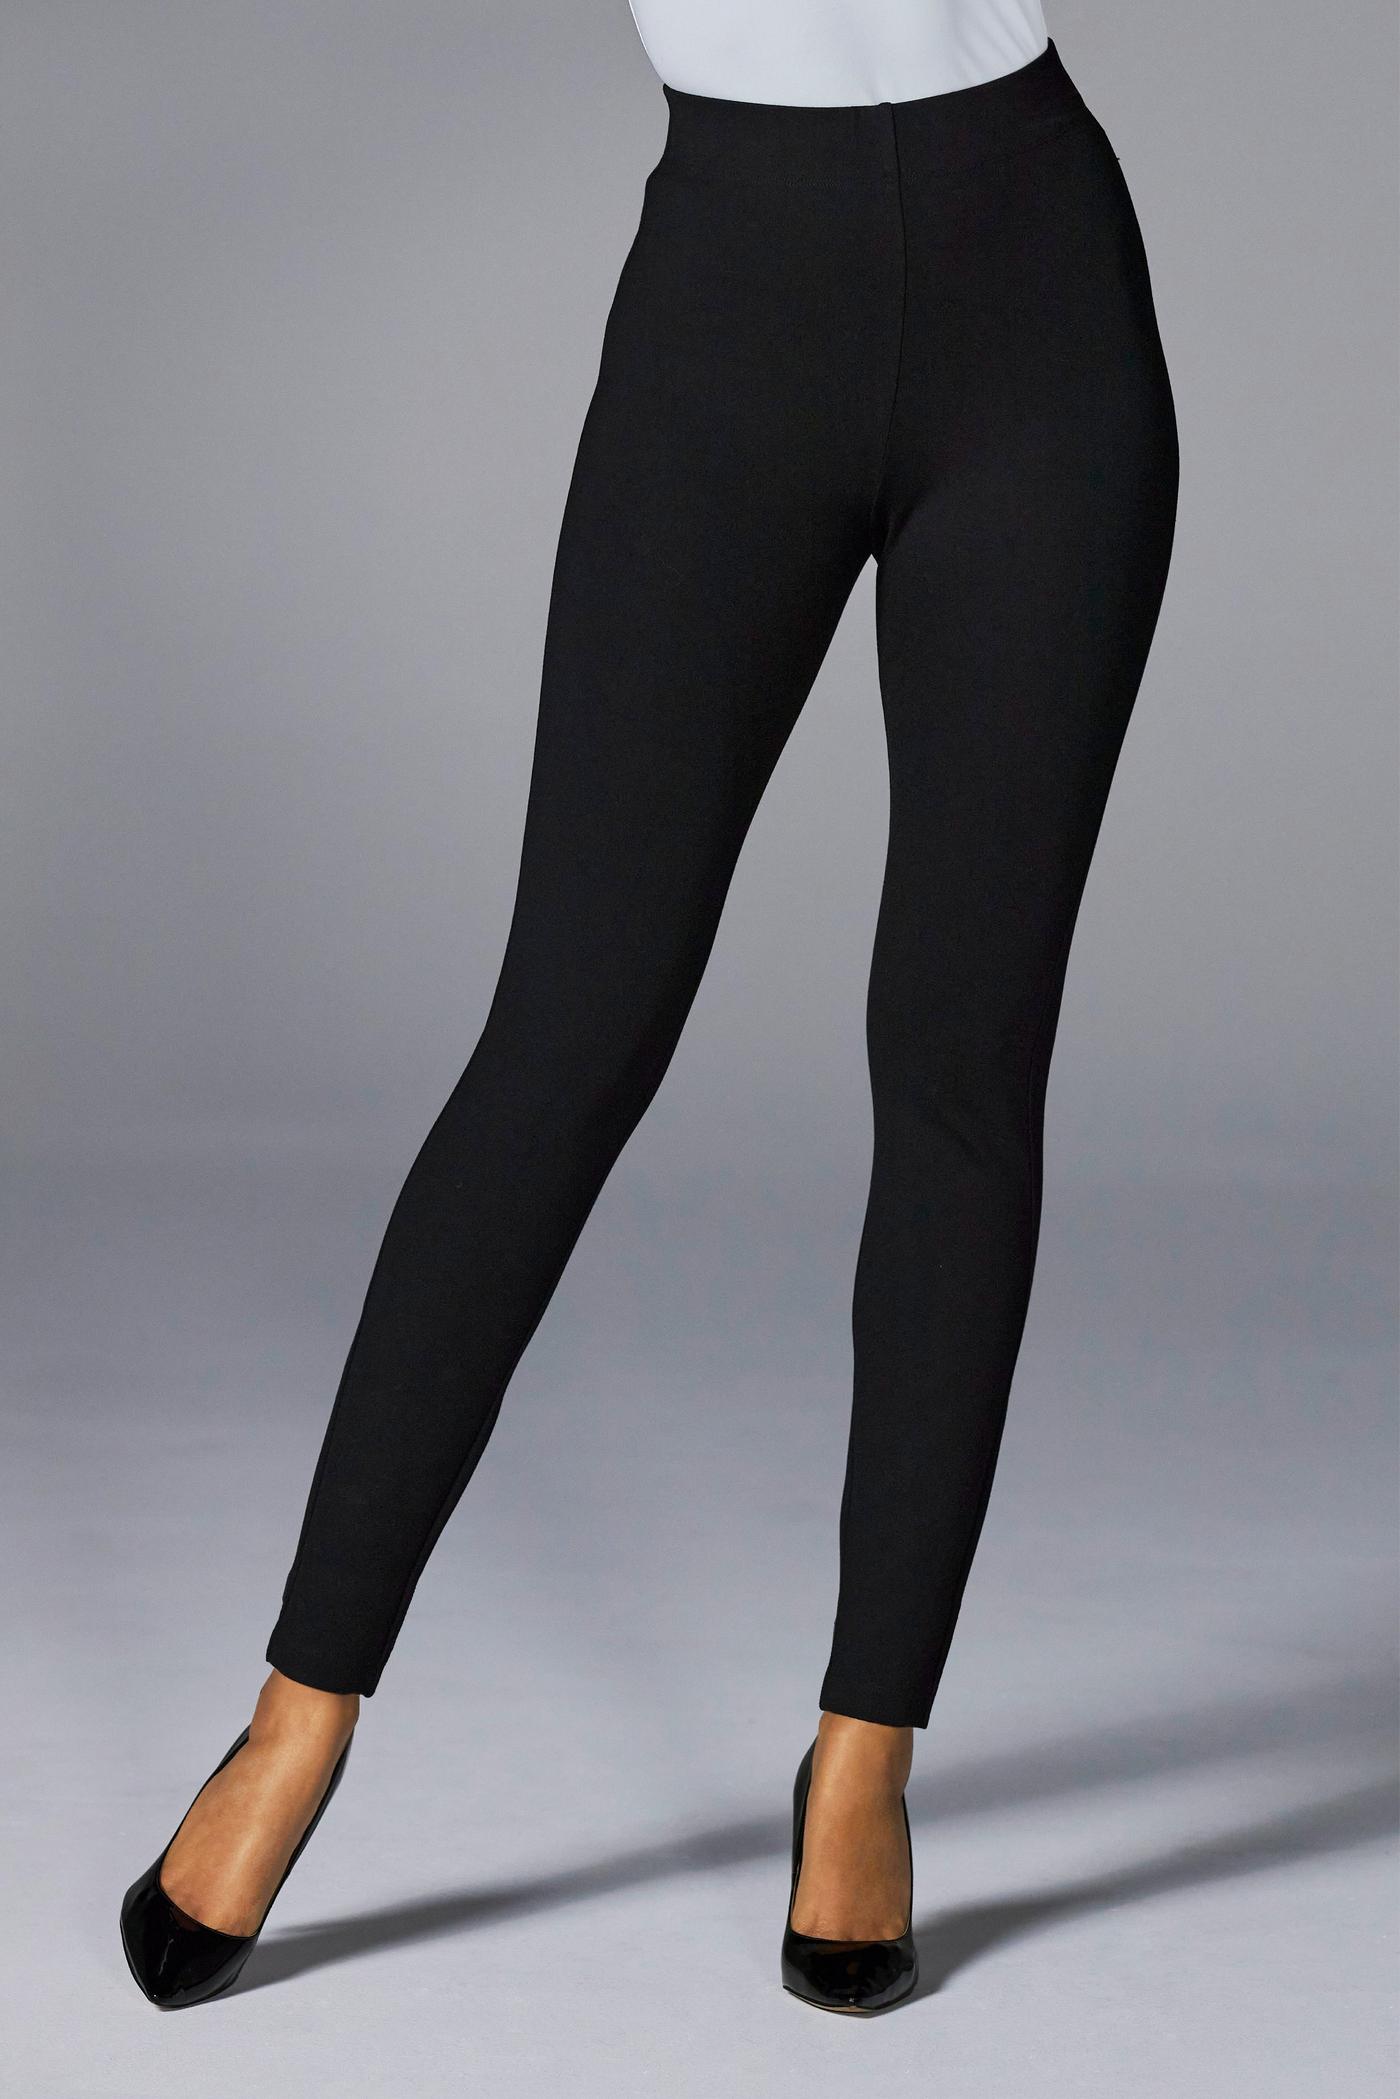 Buy Black Knitted Cotton Lycra Tights Online - W for Woman